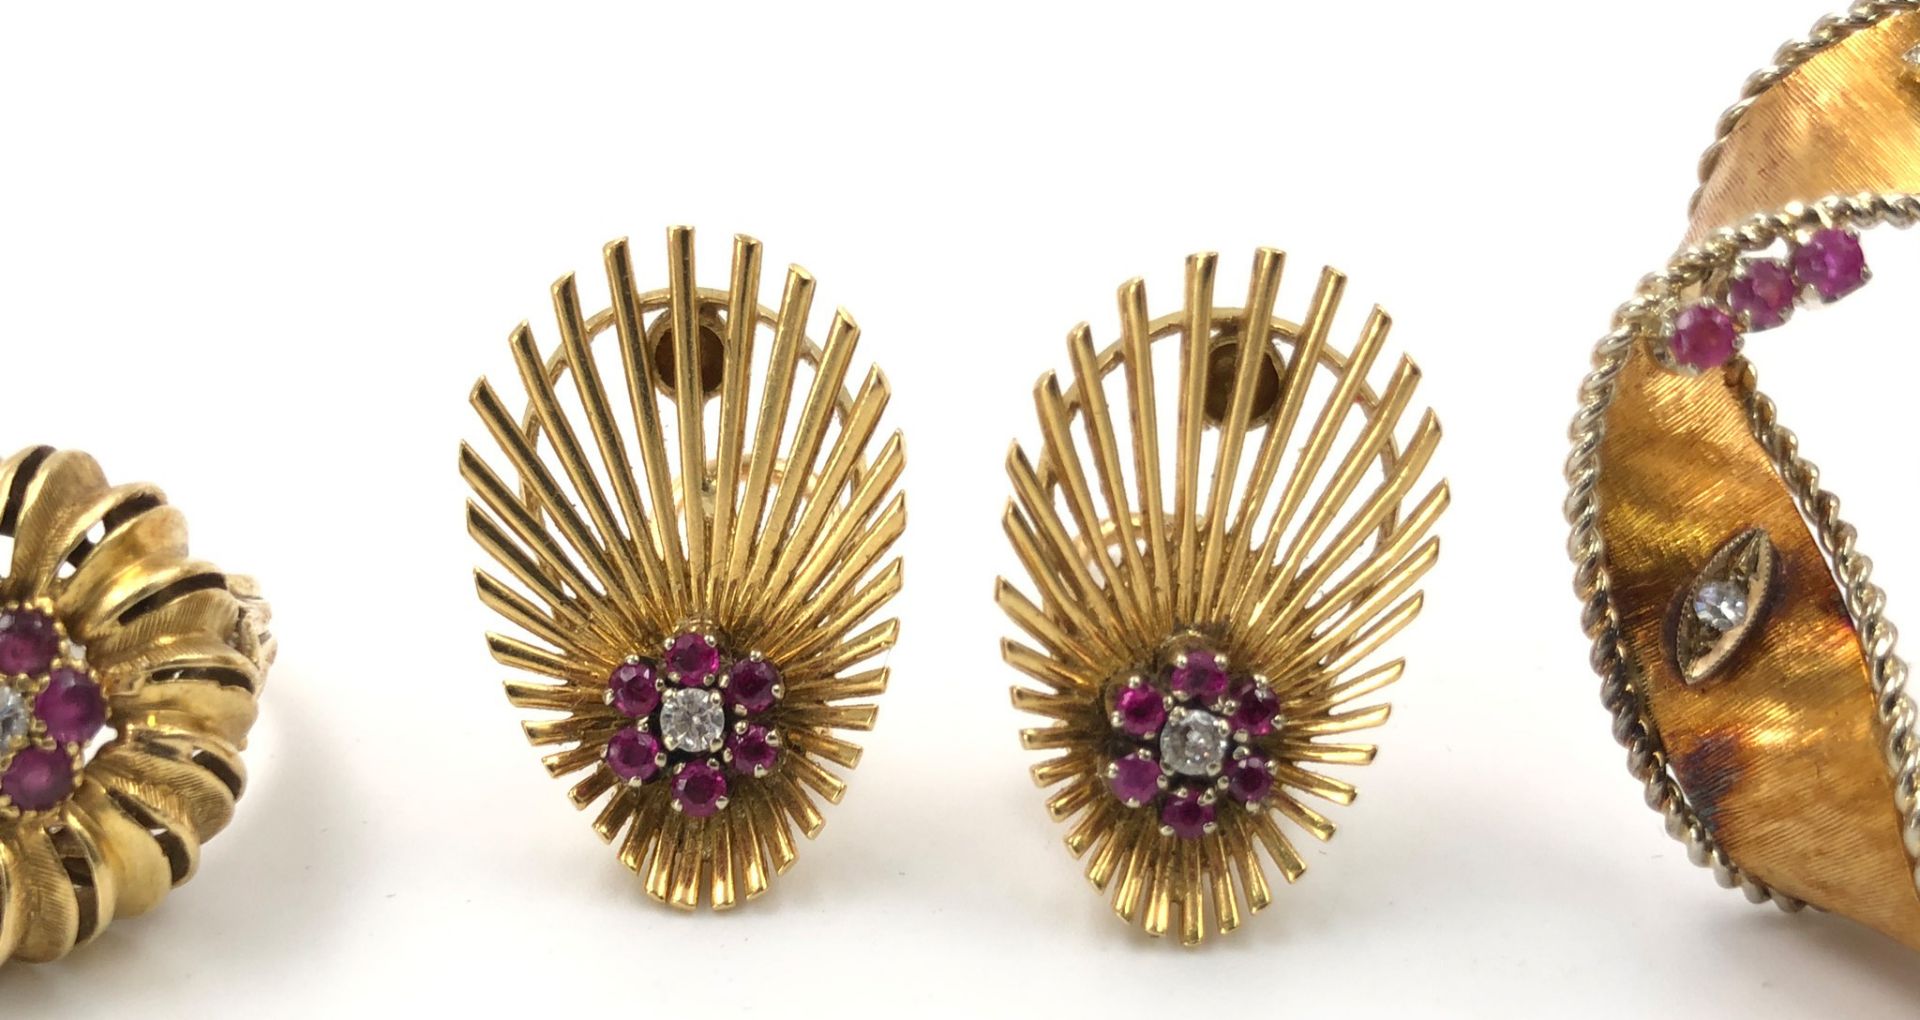 Set. 750 gold. Pair of earrings, ring and brooch. Diamonds and rubies.27.8 grams total weight. - Bild 3 aus 9